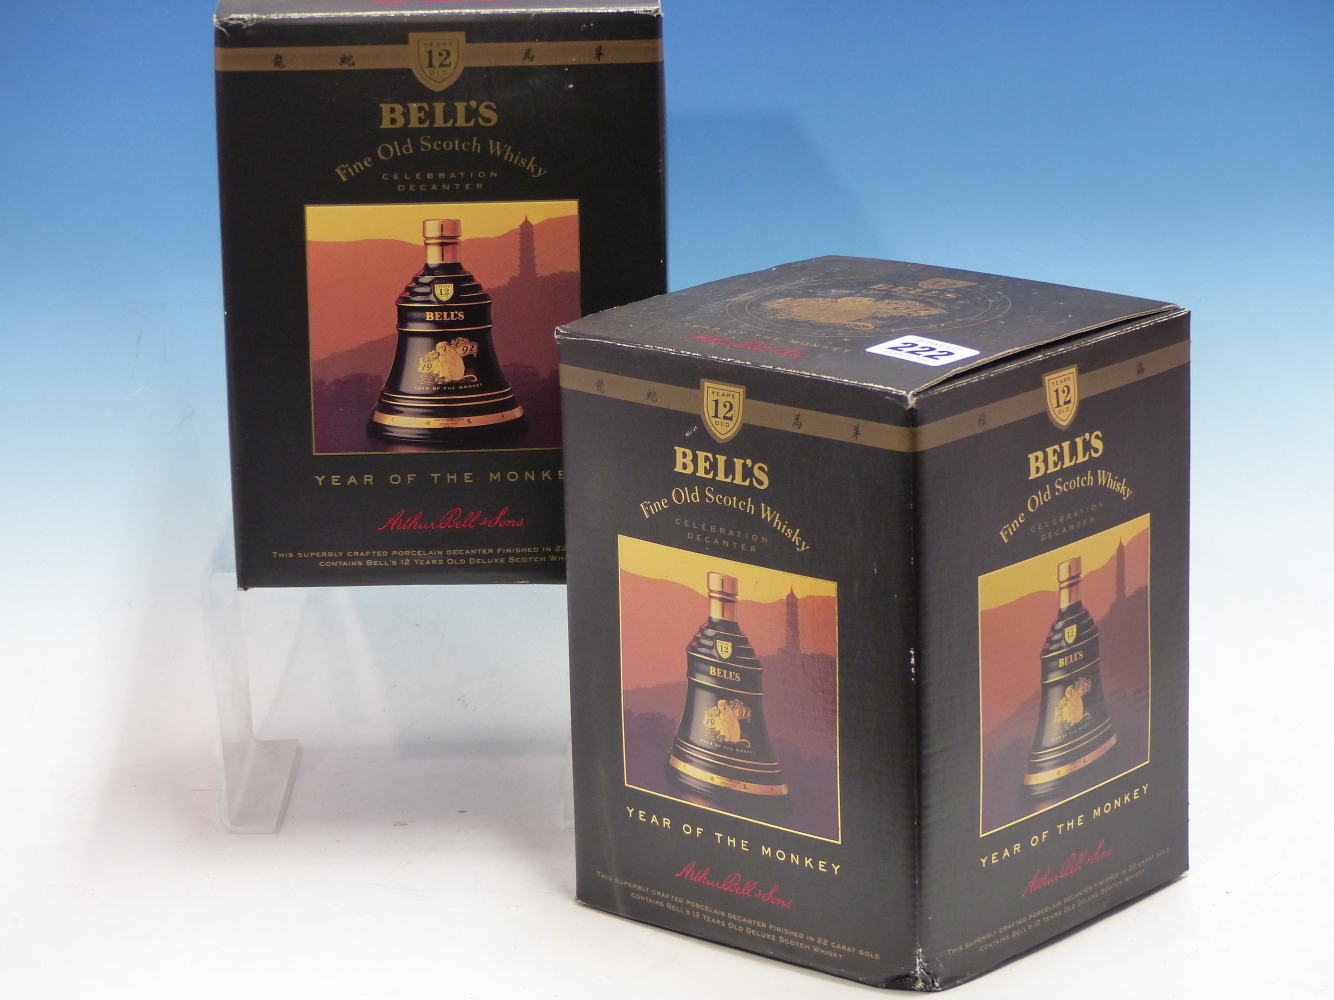 WHISKY. BELLS YEAR OF THE MONKEY 1992 EDITION 2 x BOTTLES, BOXED. (2)